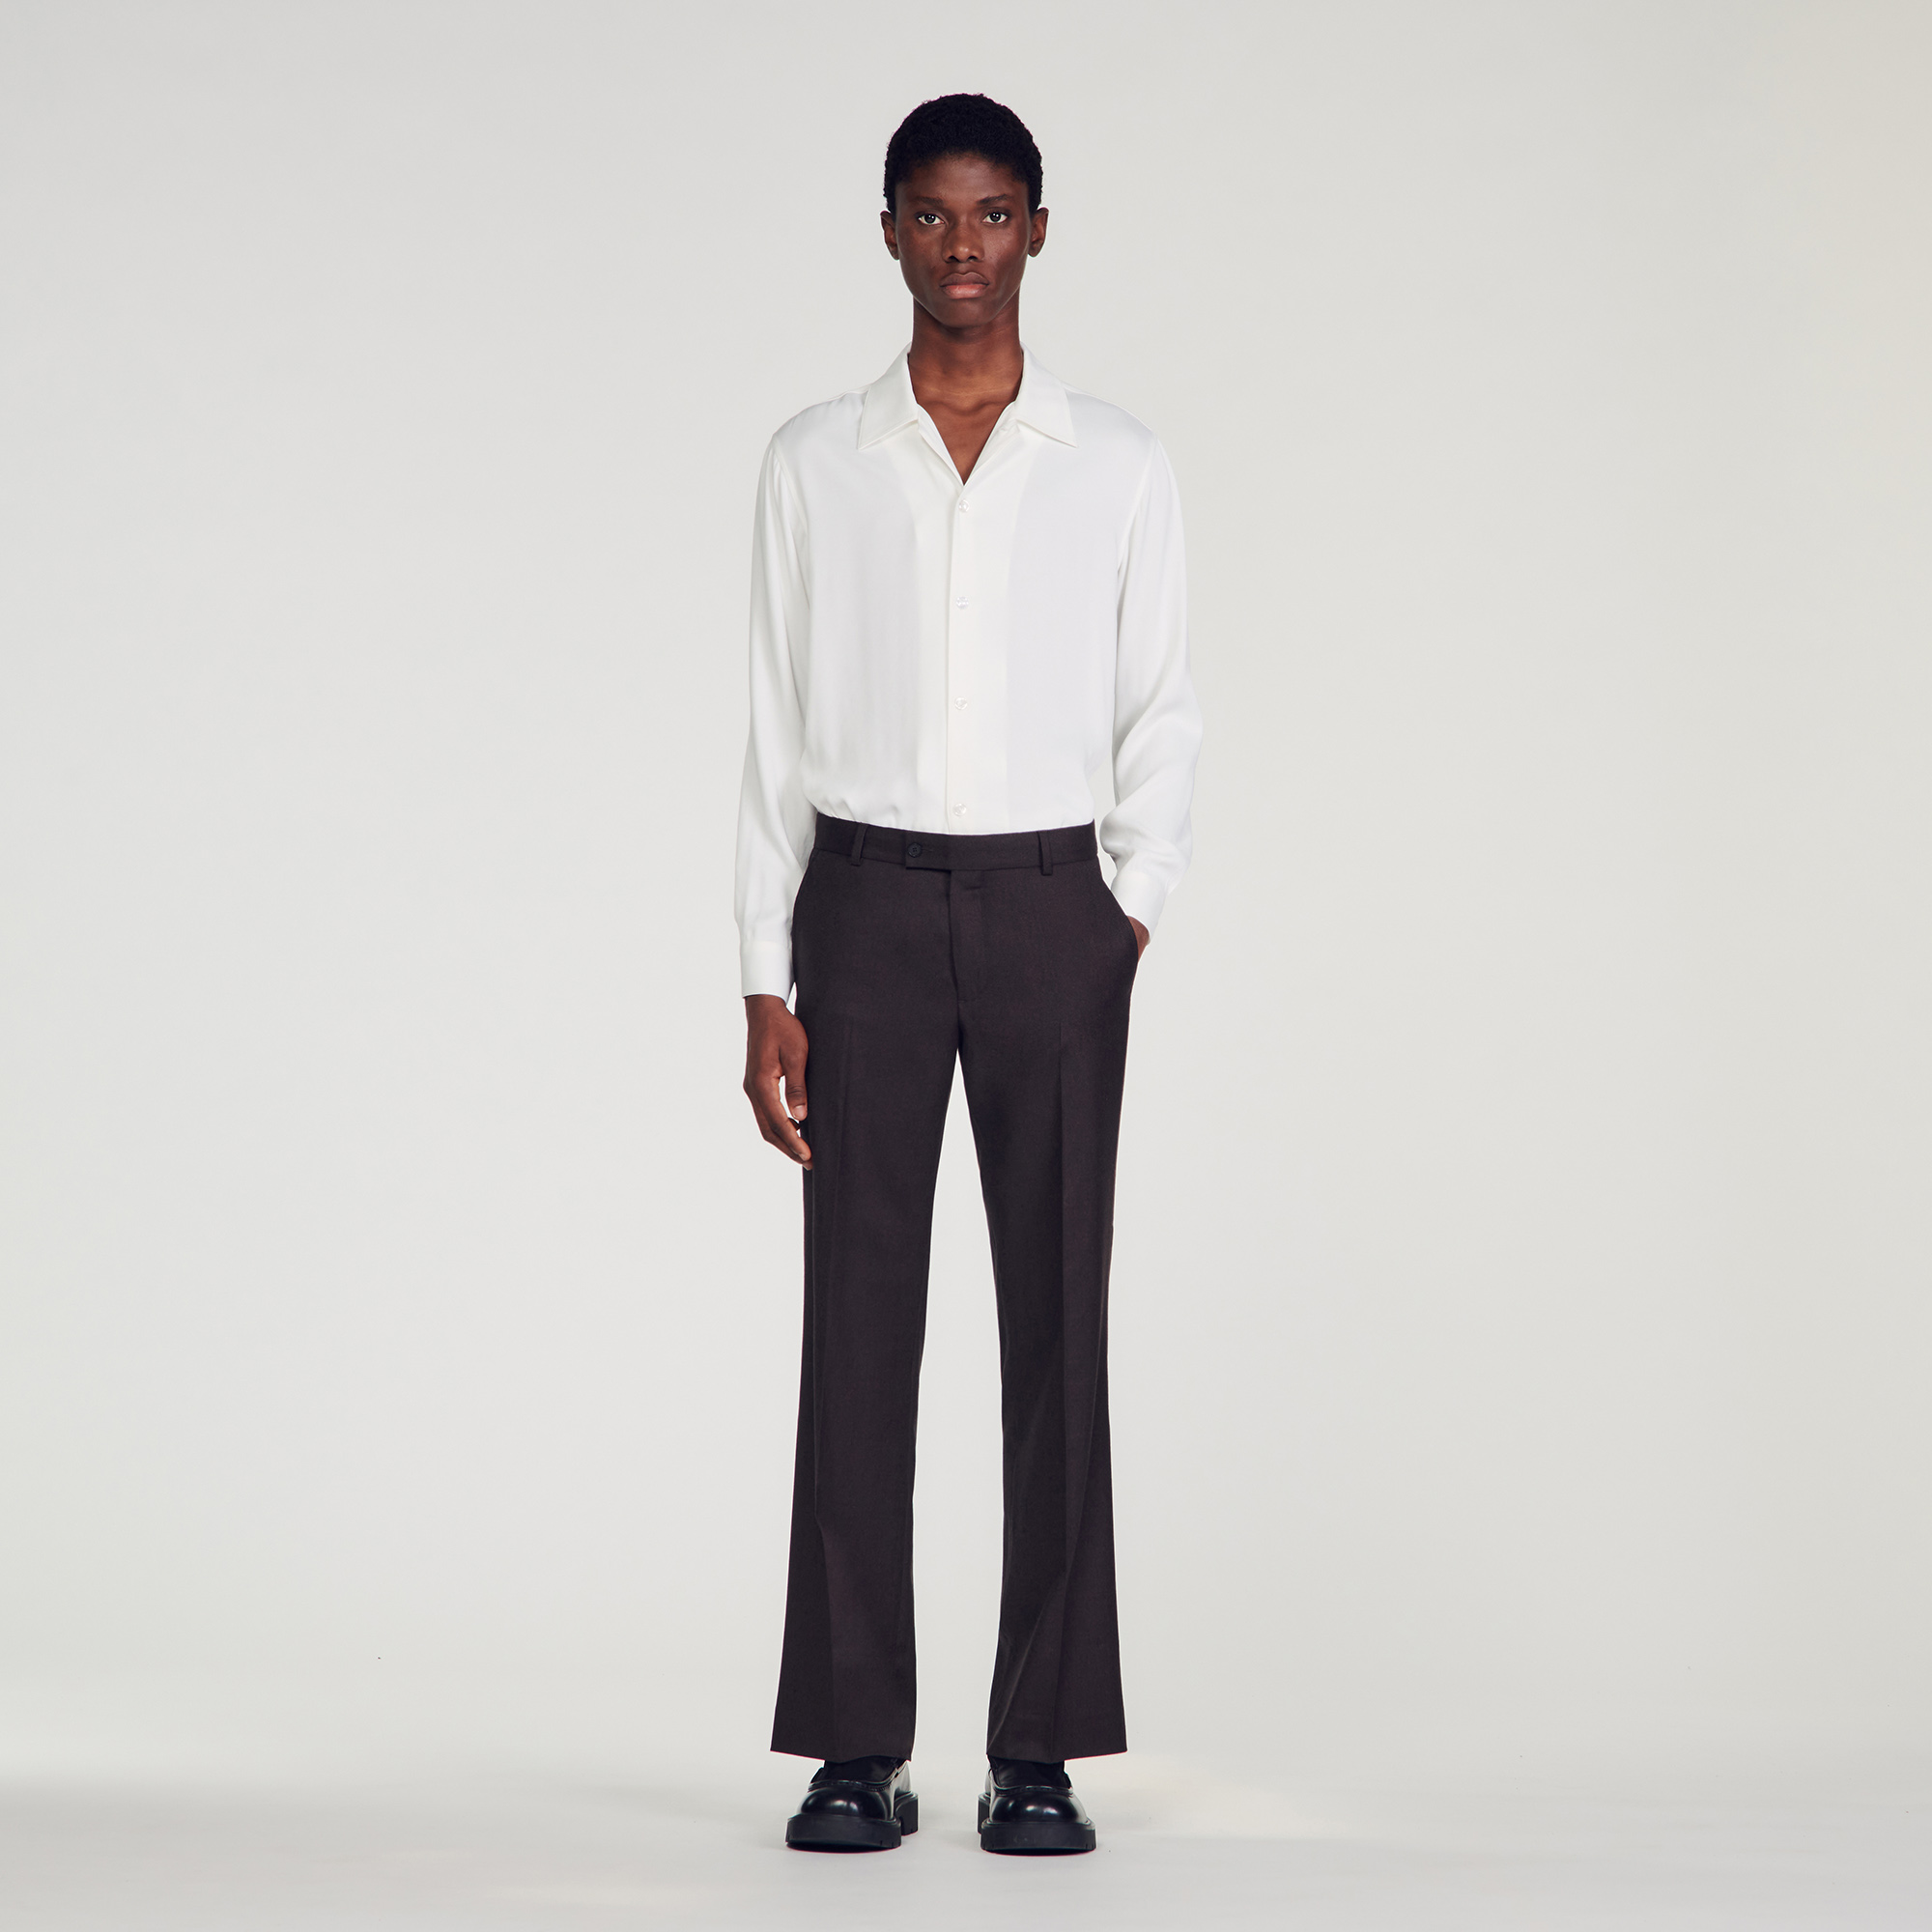 Sandro virgin wool Belt lining: Wide-leg virgin wool suit pants with high waist, front and back pockets